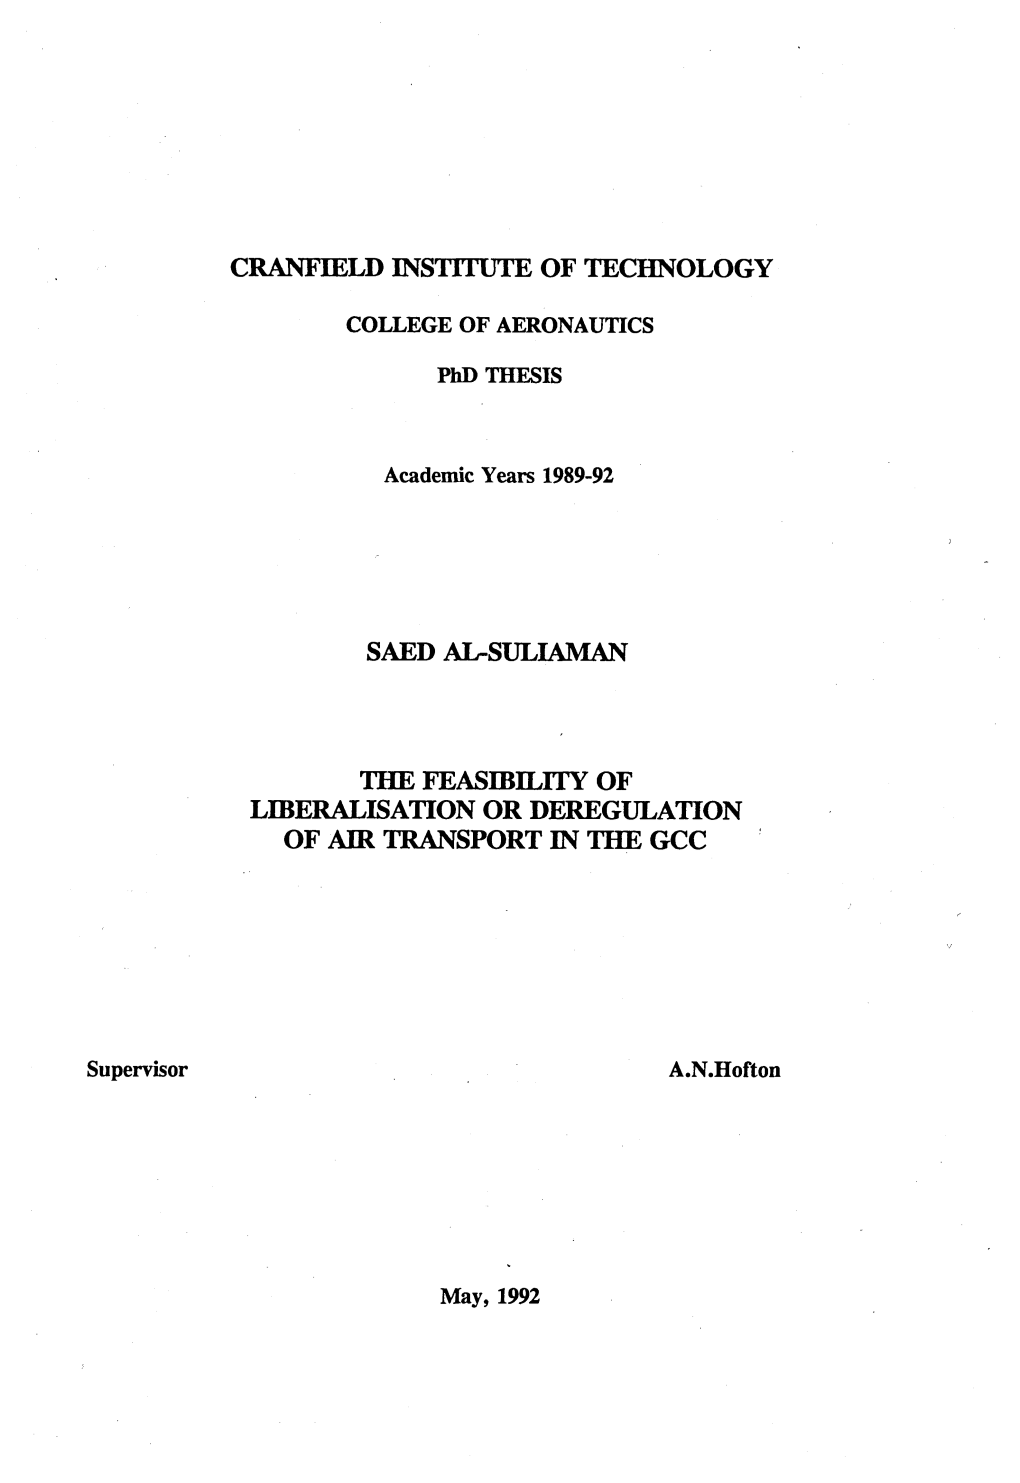 Cranfield Institute of Technology Saed Al-Suliaman the Feasibility of Liberalisation Or Deregulation of Air Transport in The